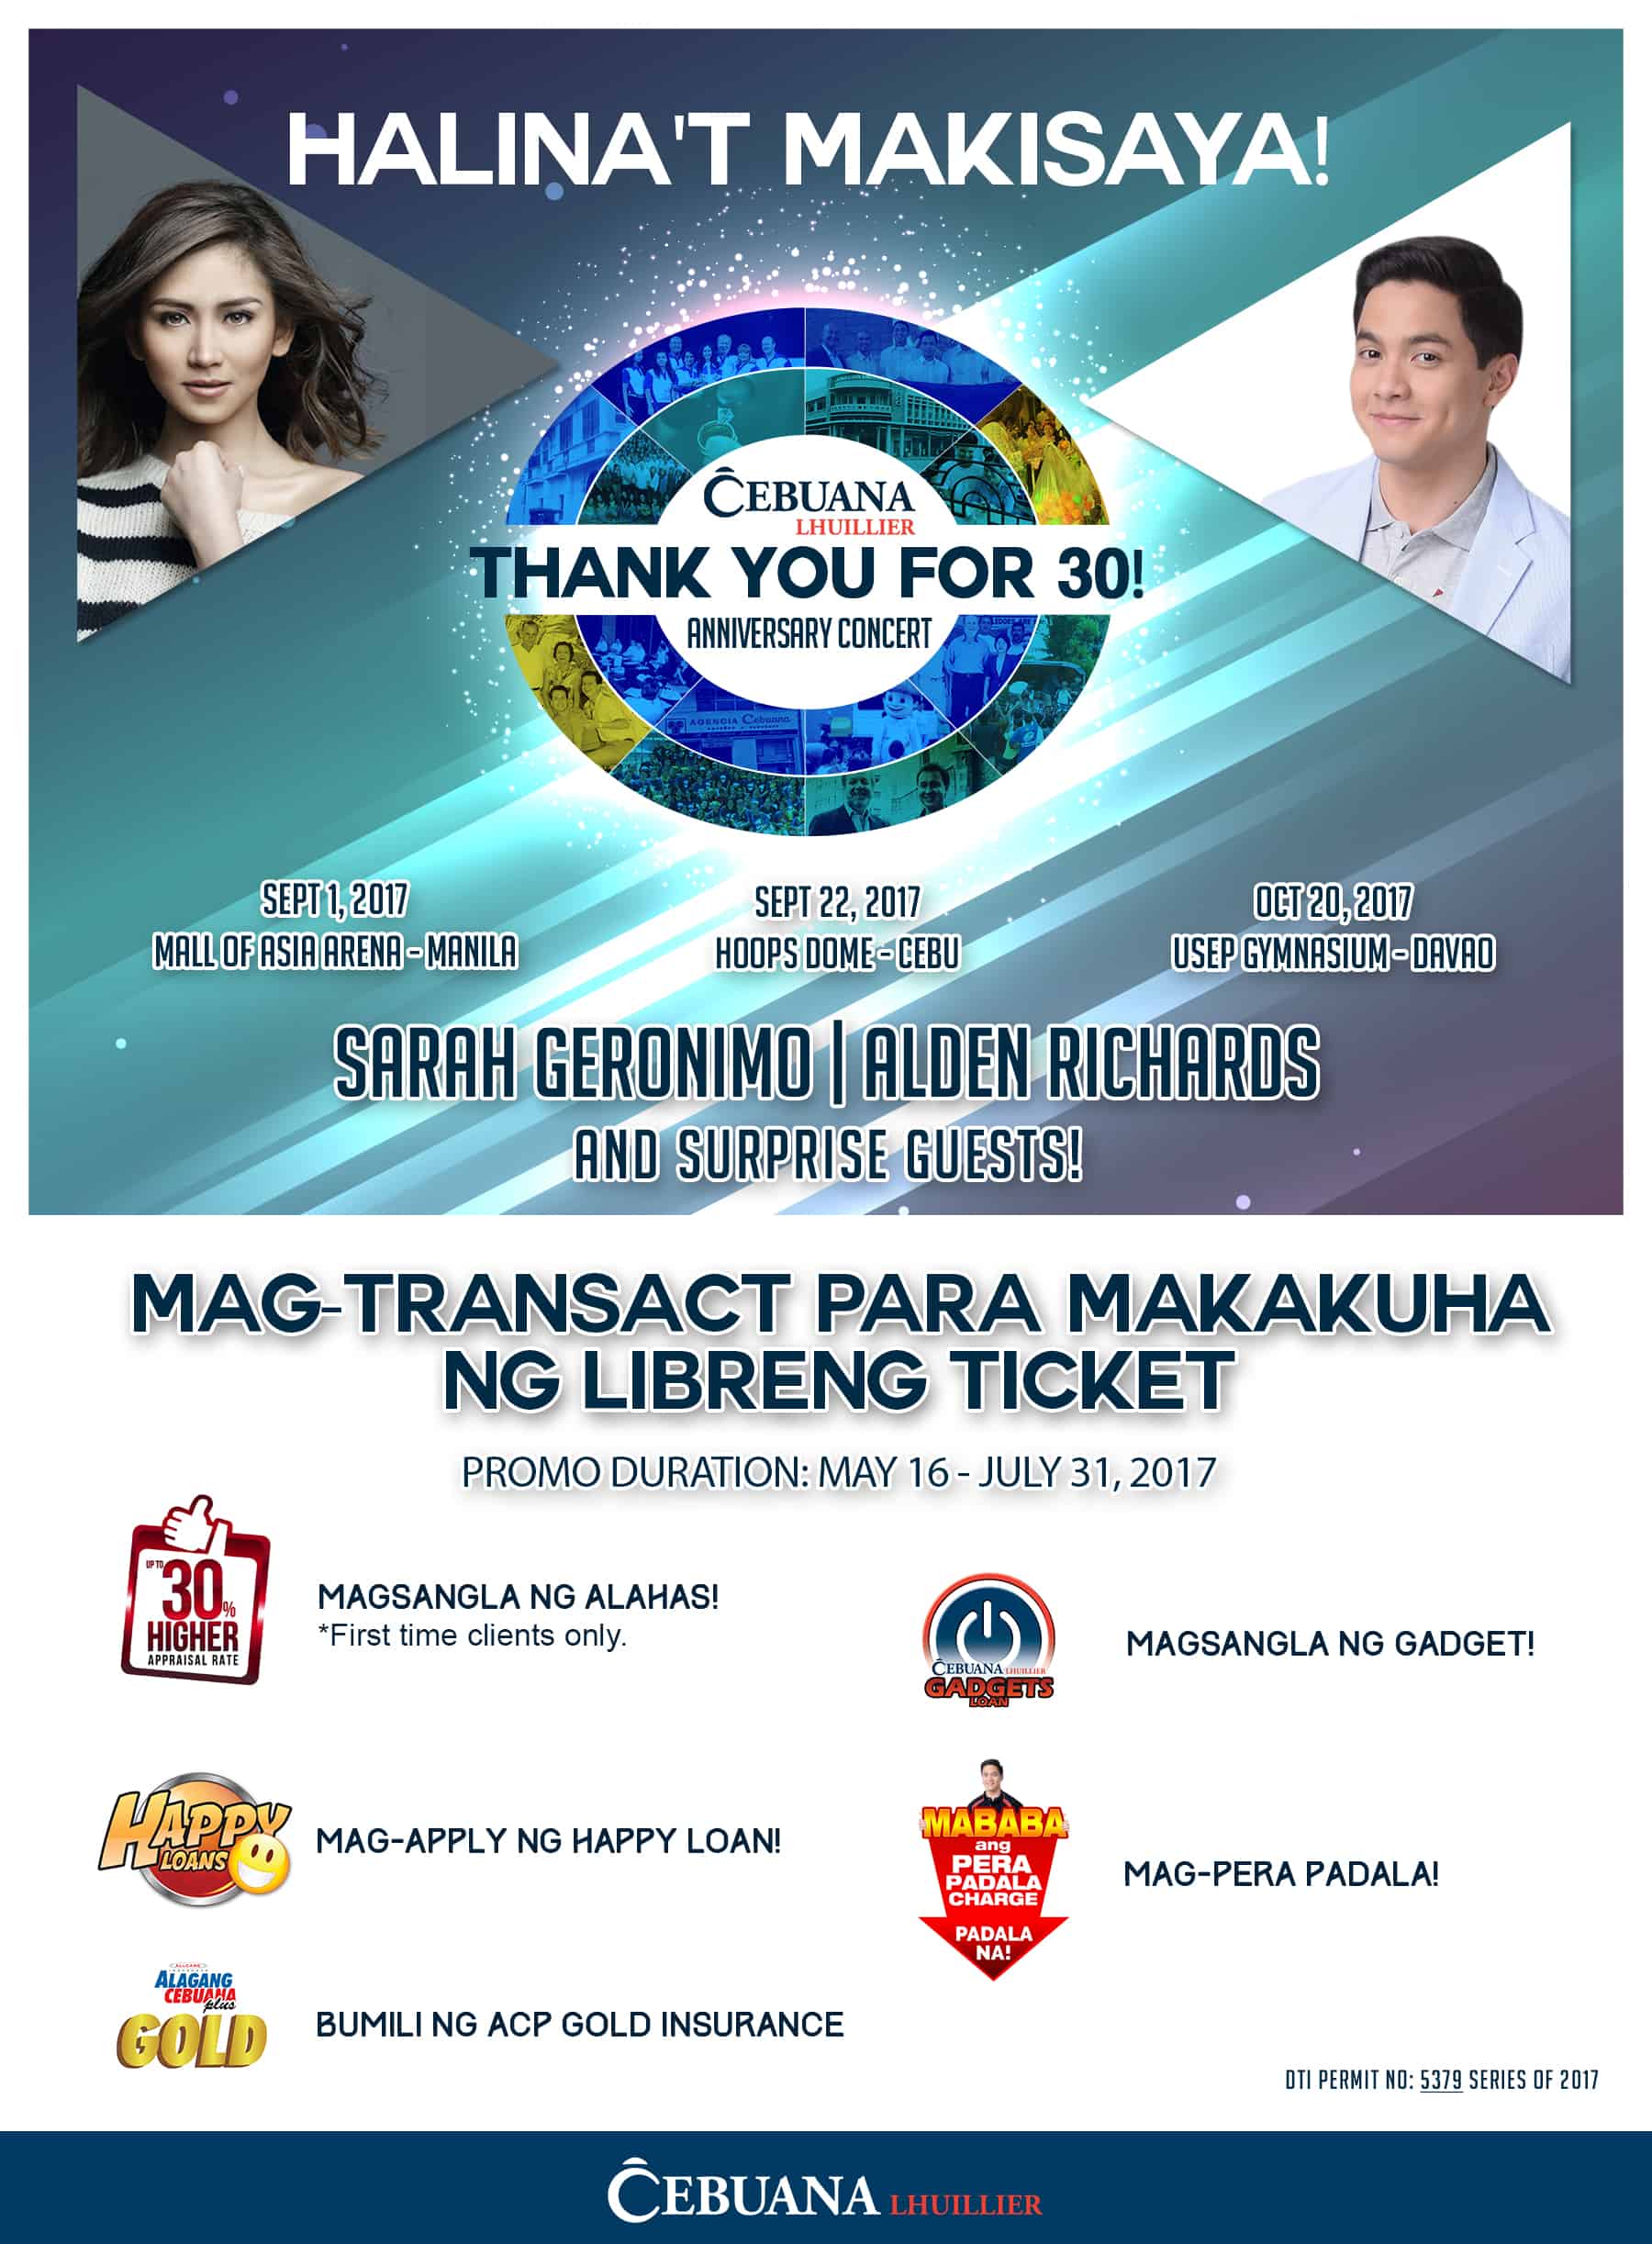 Get FREE TICKETS to Cebuana Lhuillier’s “Thank You for 30!” Anniversary Concert series!